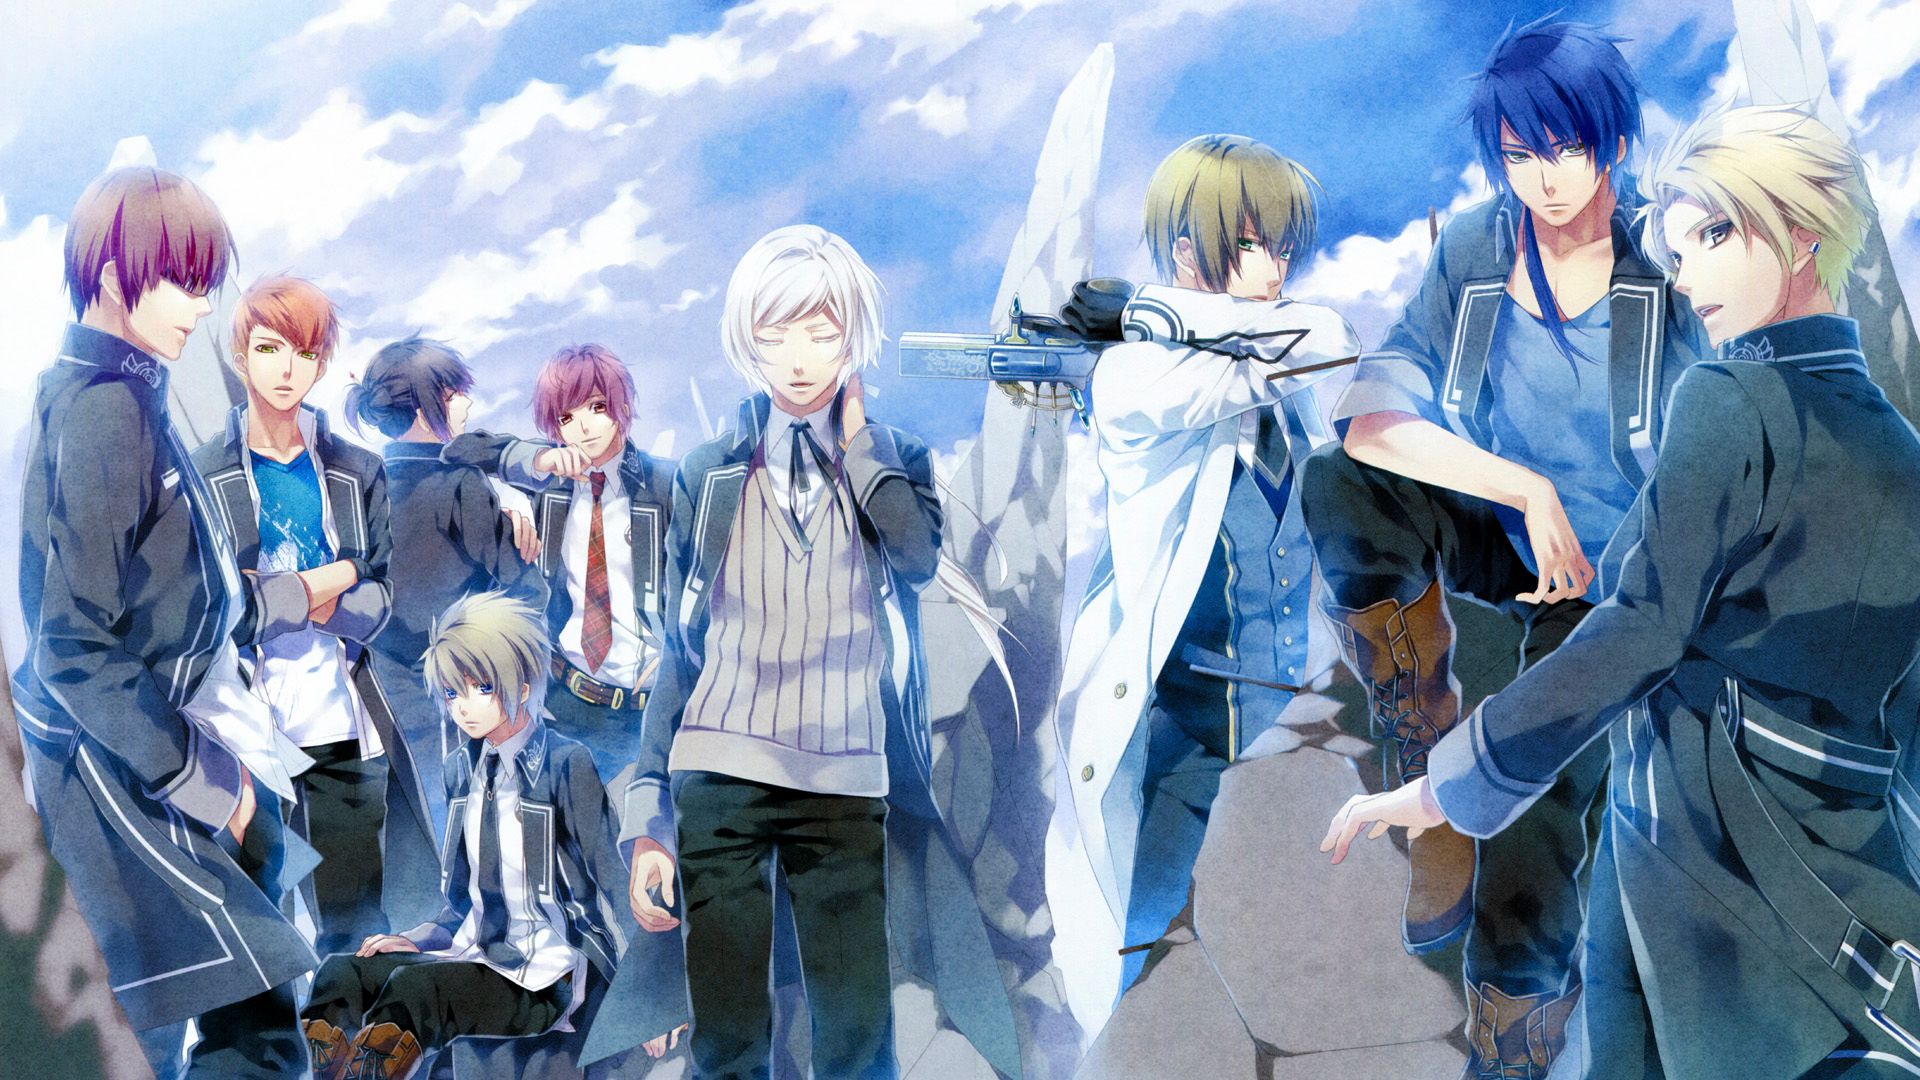 Norn9 background